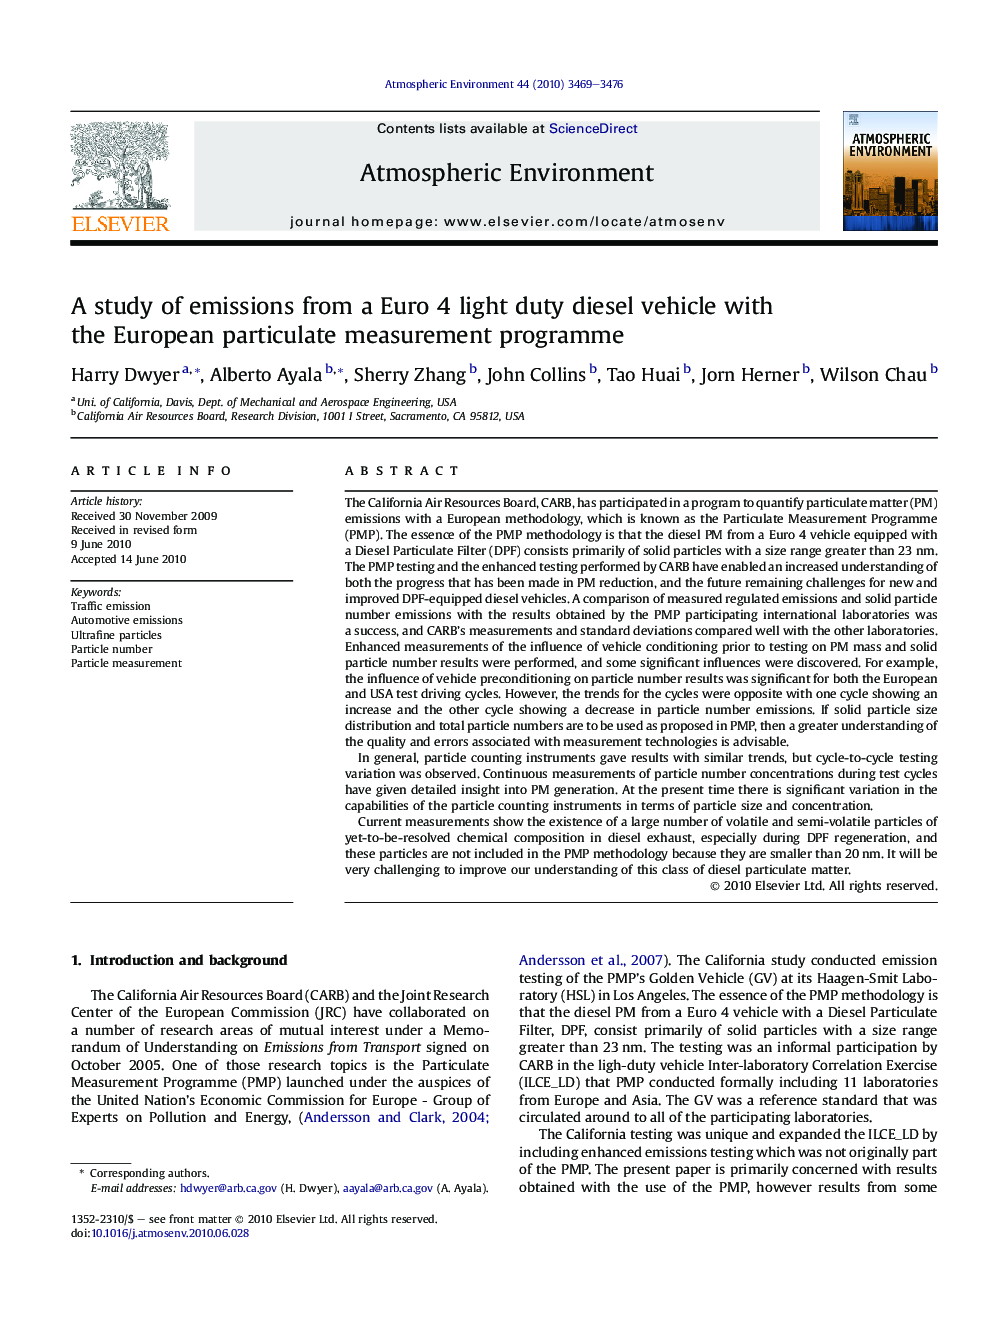 A study of emissions from a Euro 4 light duty diesel vehicle with the European particulate measurement programme